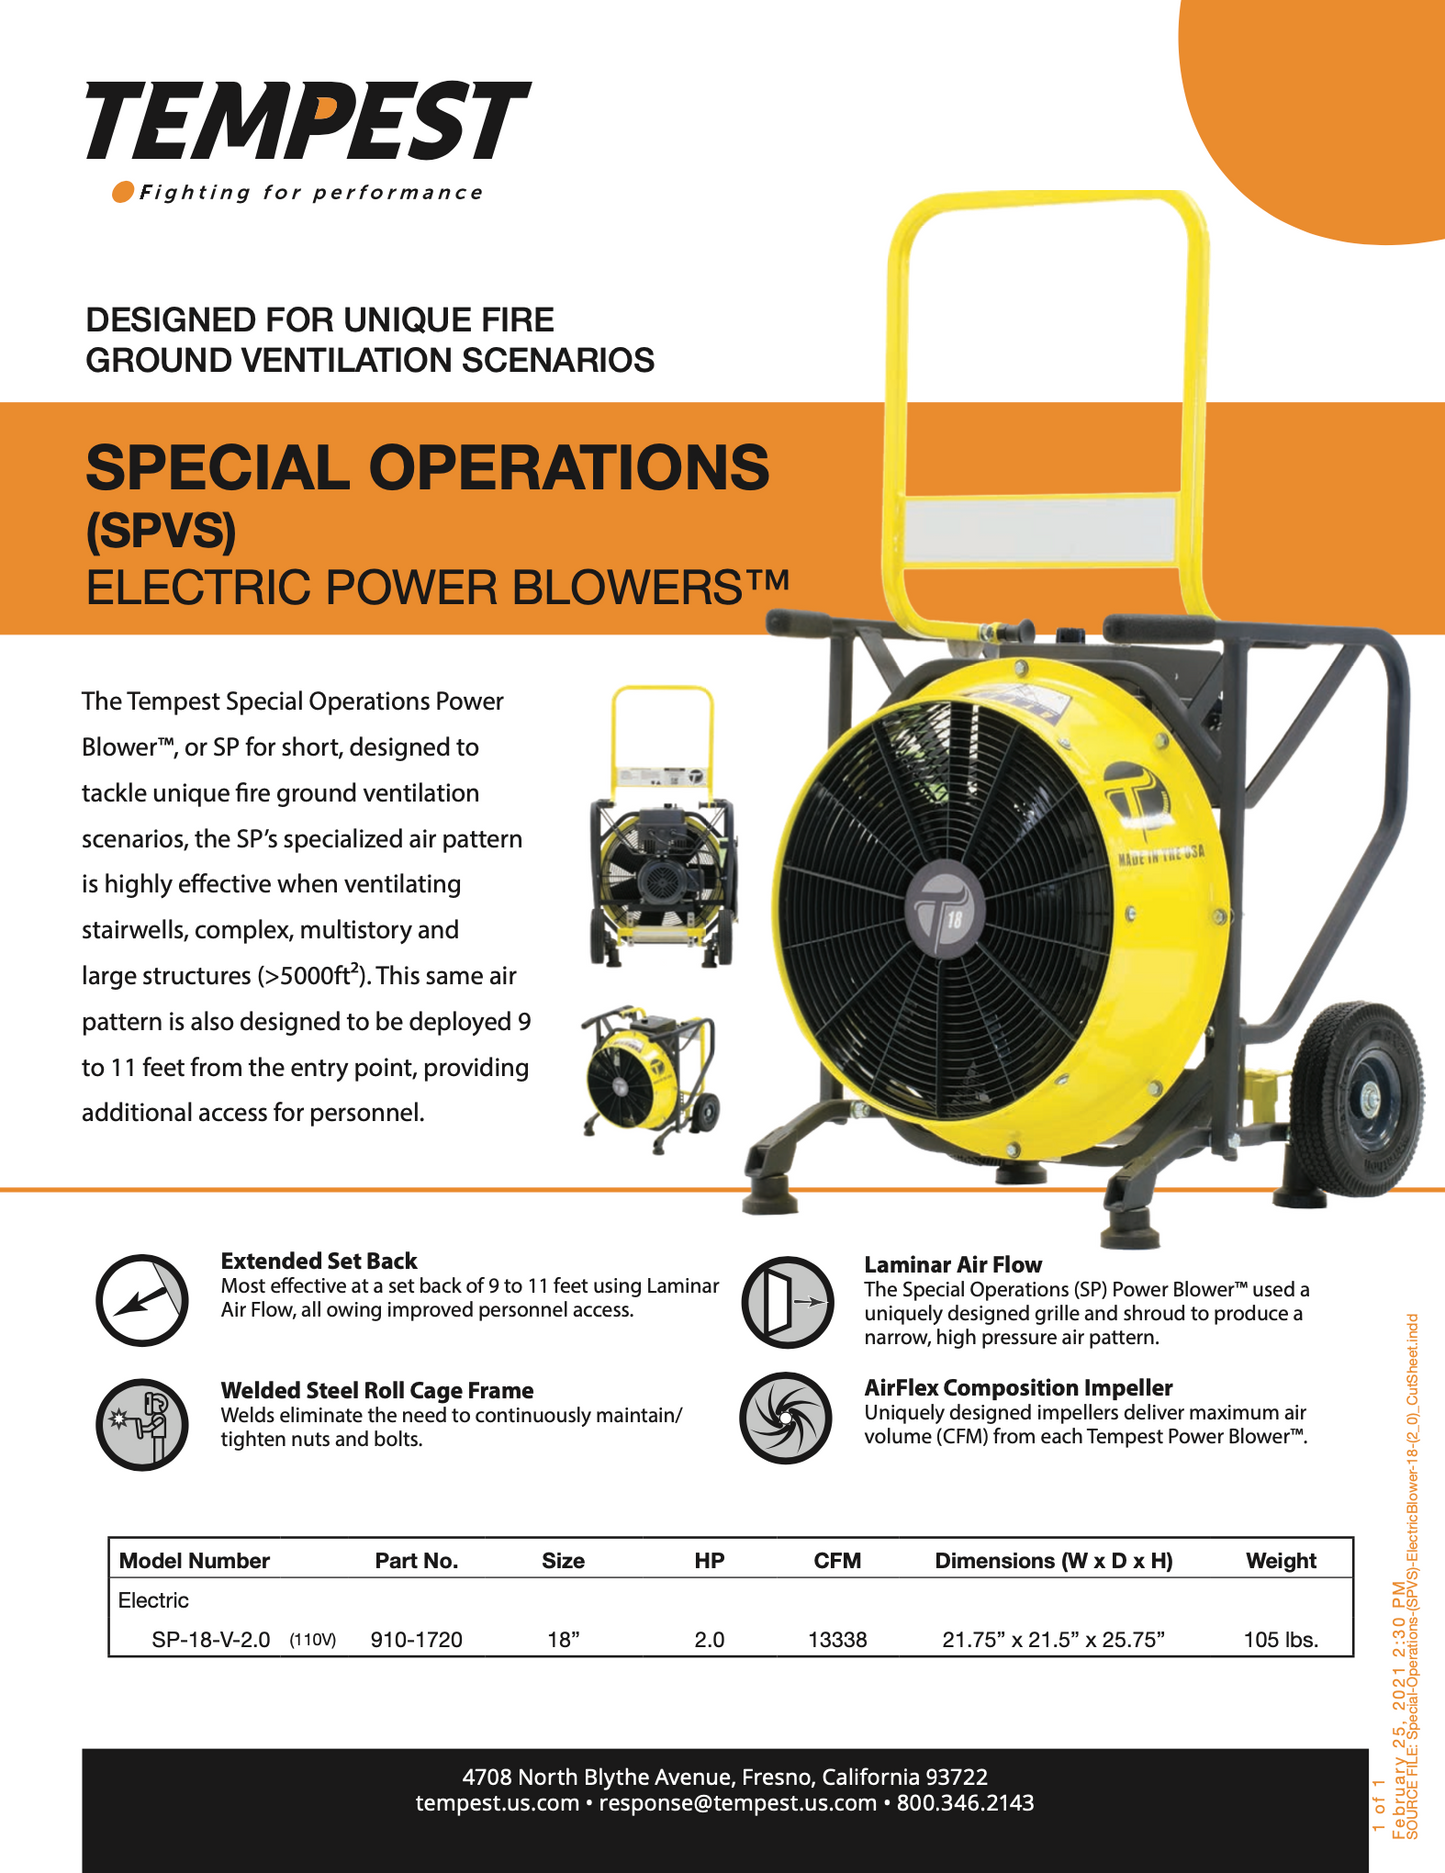 SPECIAL - OPERATIONS ELECTRIC POWER BLOWER